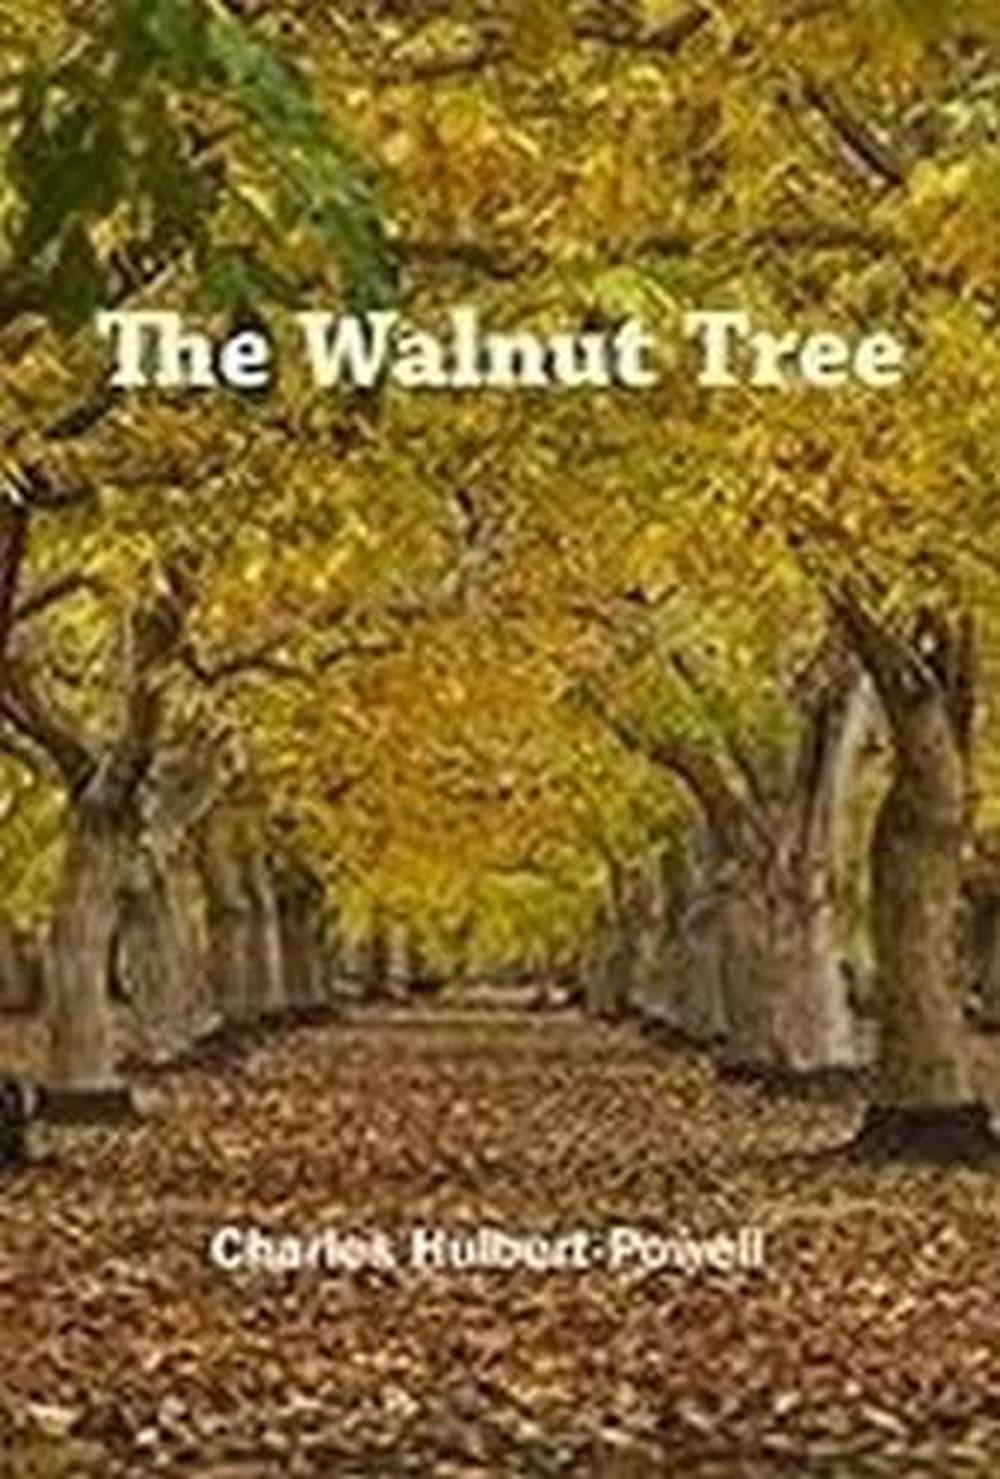 The　9781911604570　Hulbert-Powell,　online　Walnut　Charles　Hardcover,　Tree　Buy　The　by　at　Nile